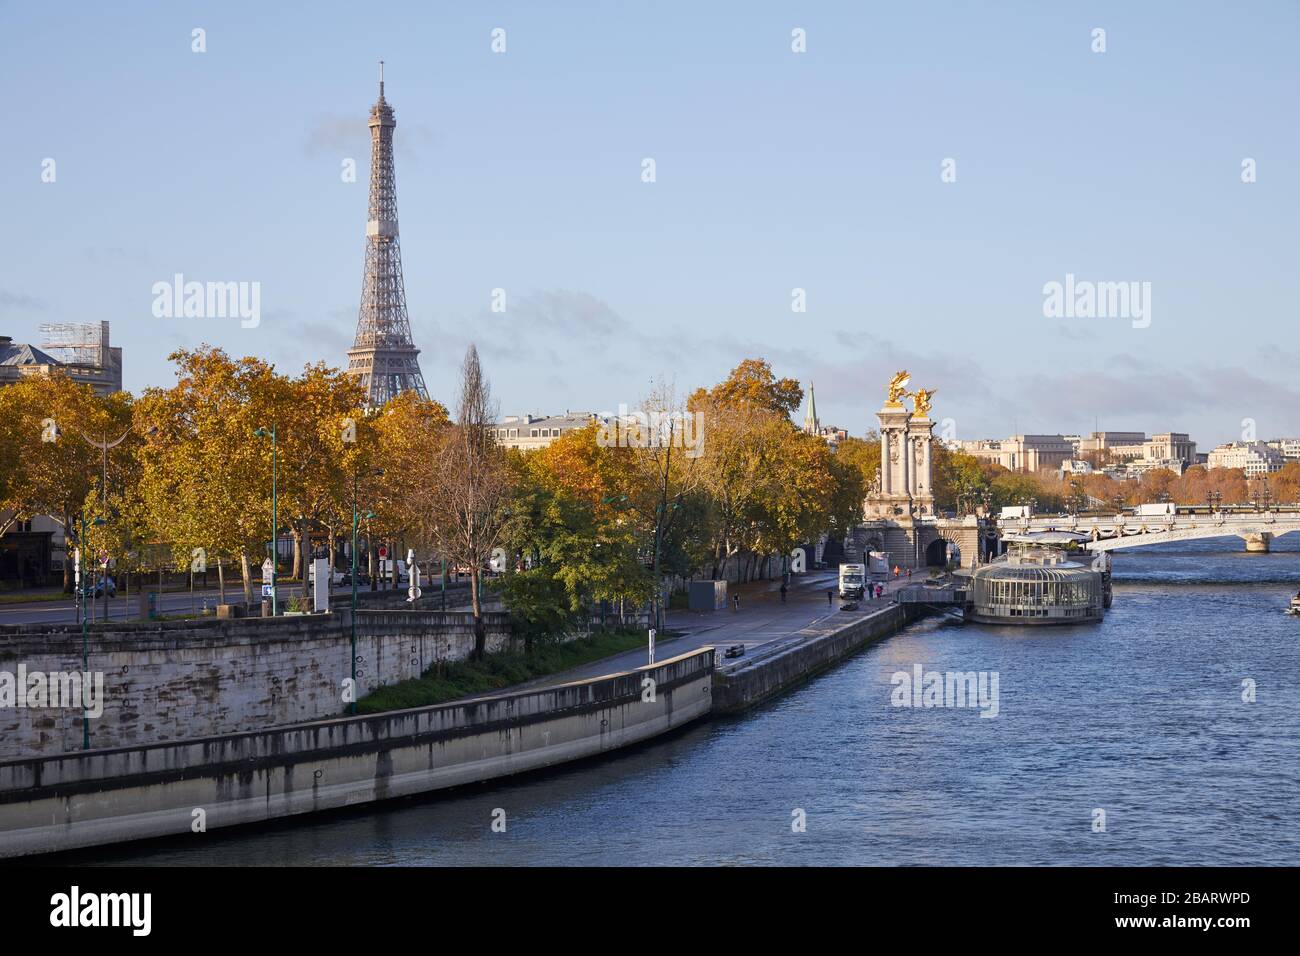 Seine river view with docks, Eiffel tower and Alexander III bridge in a sunny autumn day in Paris Stock Photo